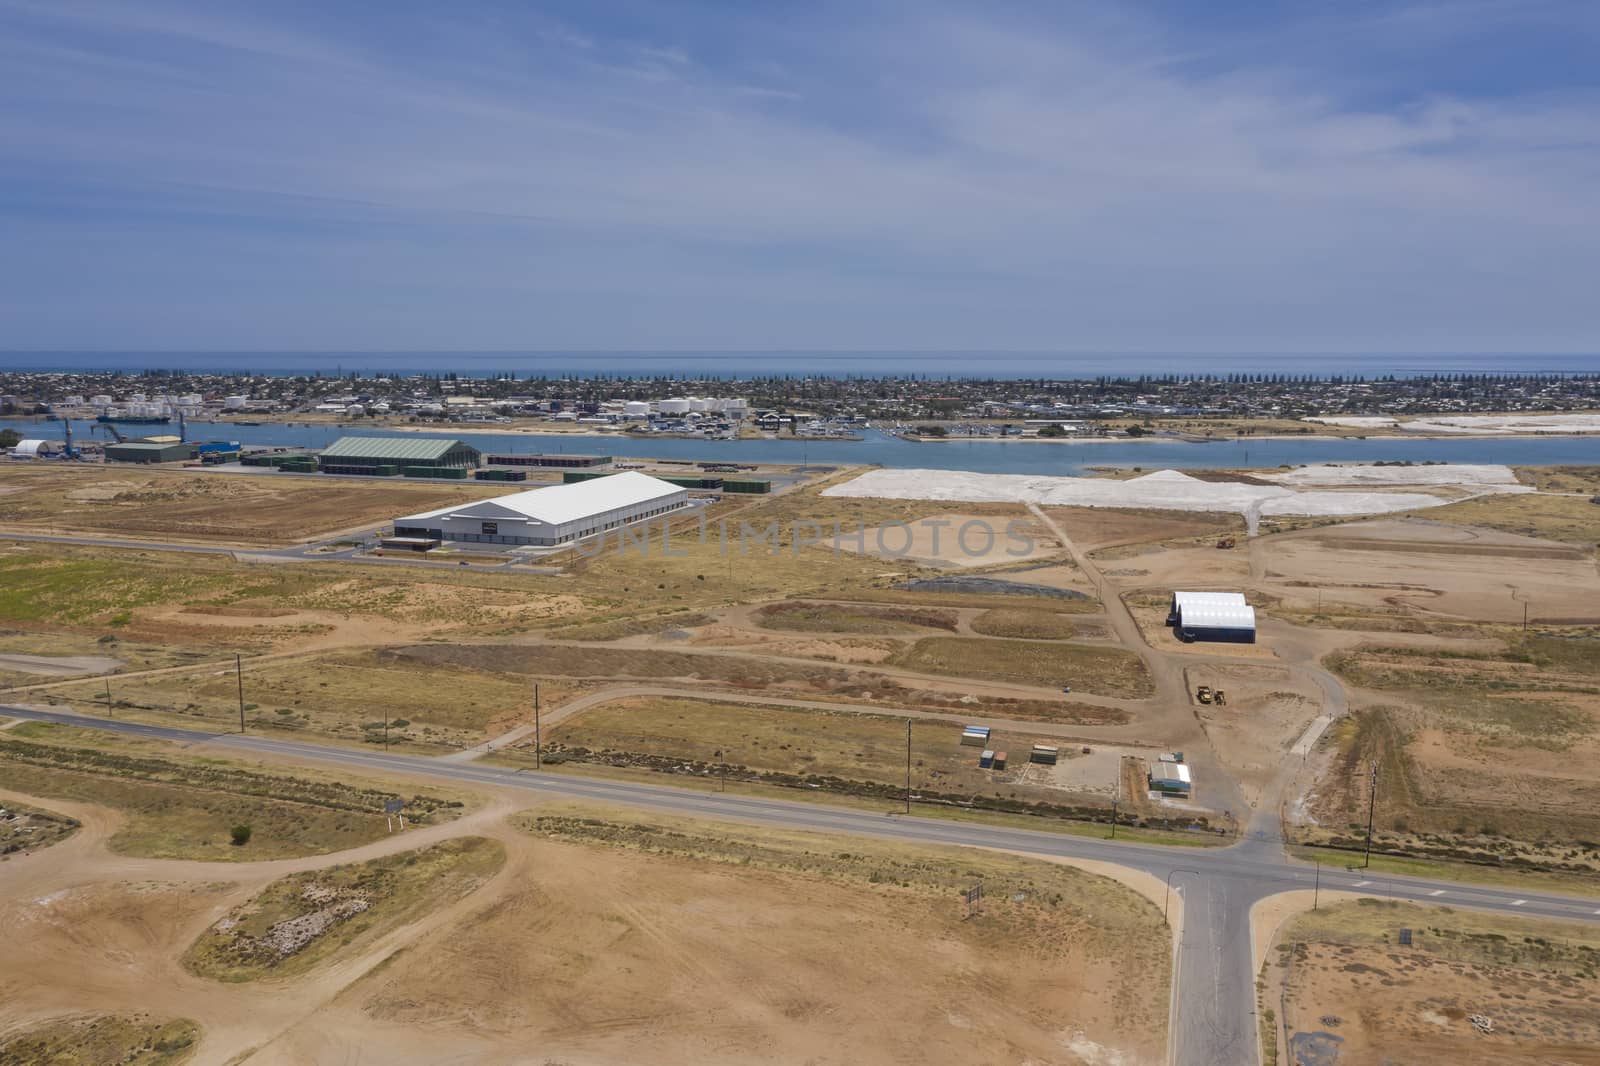 Aerial view of an industrial zone in Port Adelaide in South Australia